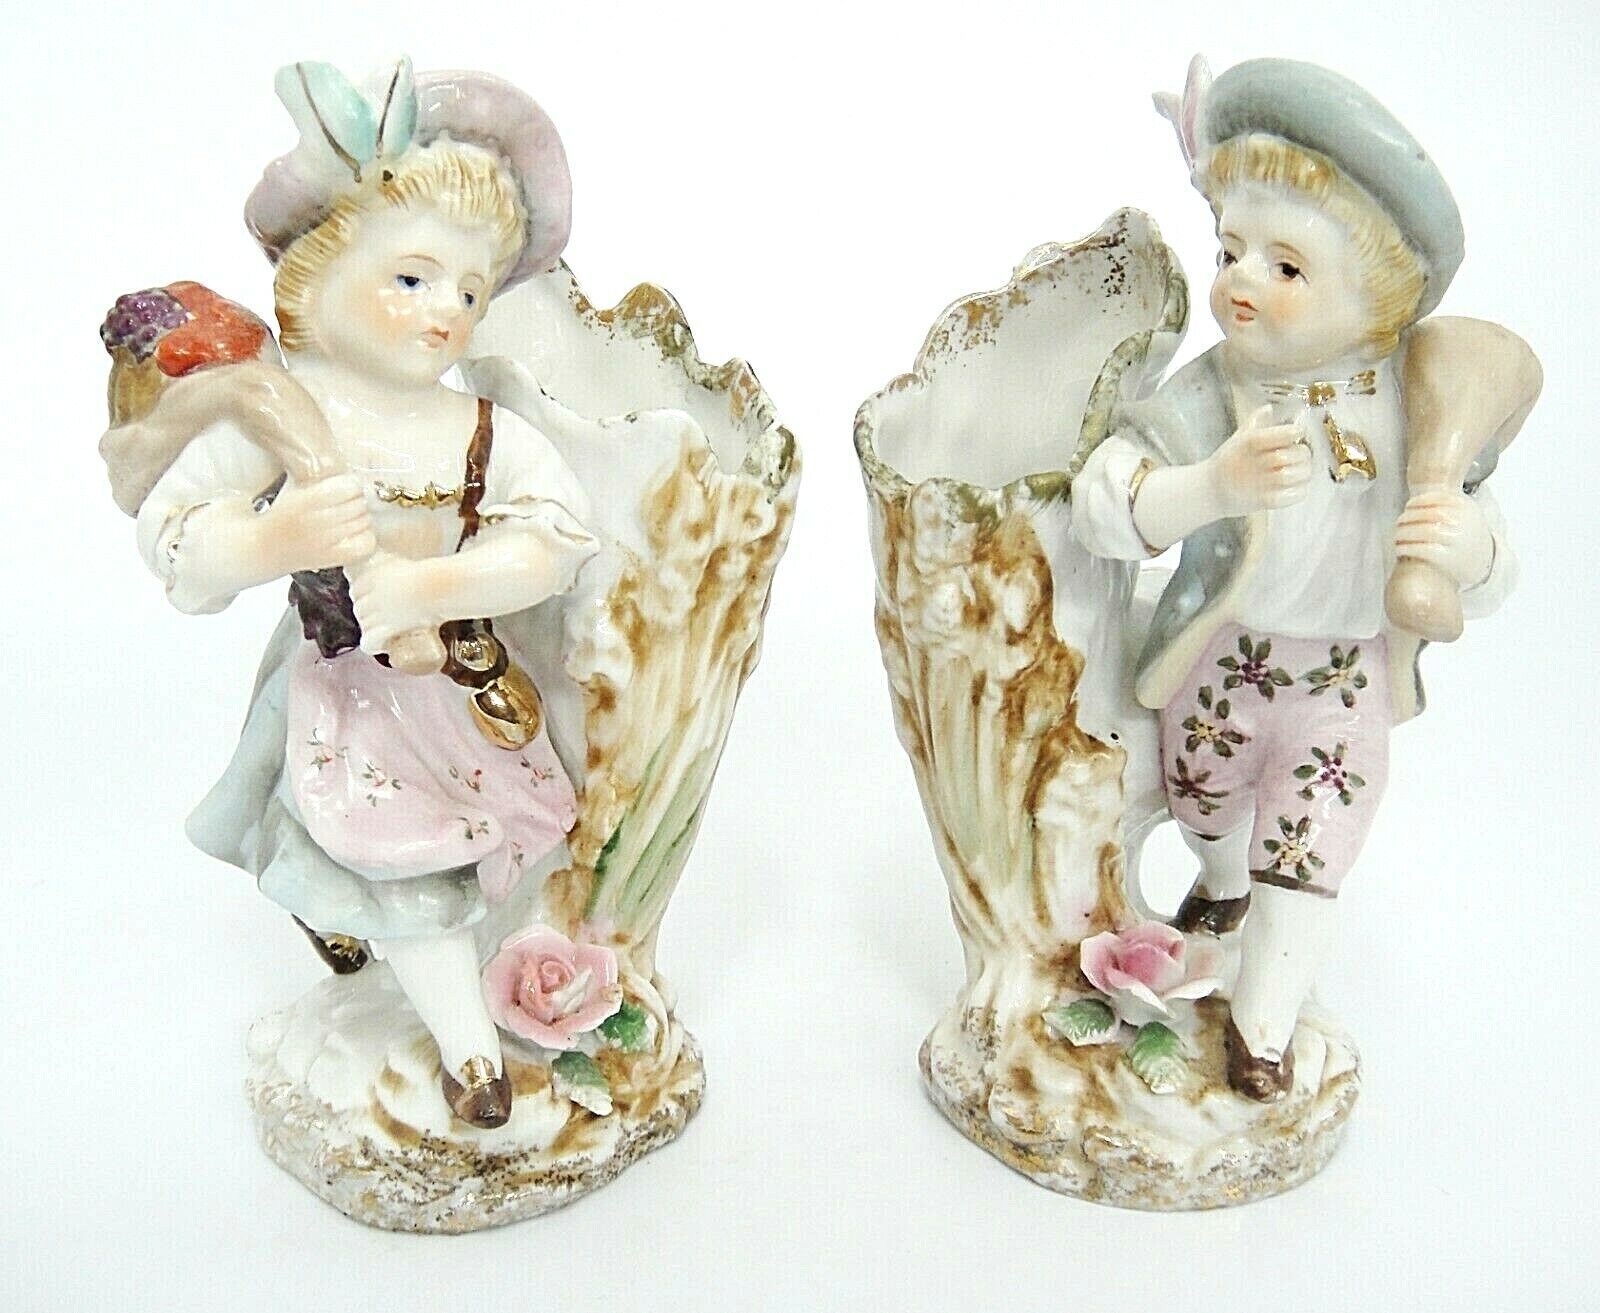 Vintage Ucagco Pair Figural Spill Vases Peasant Boy and Girl 6" Traveler Hikers - $18.80